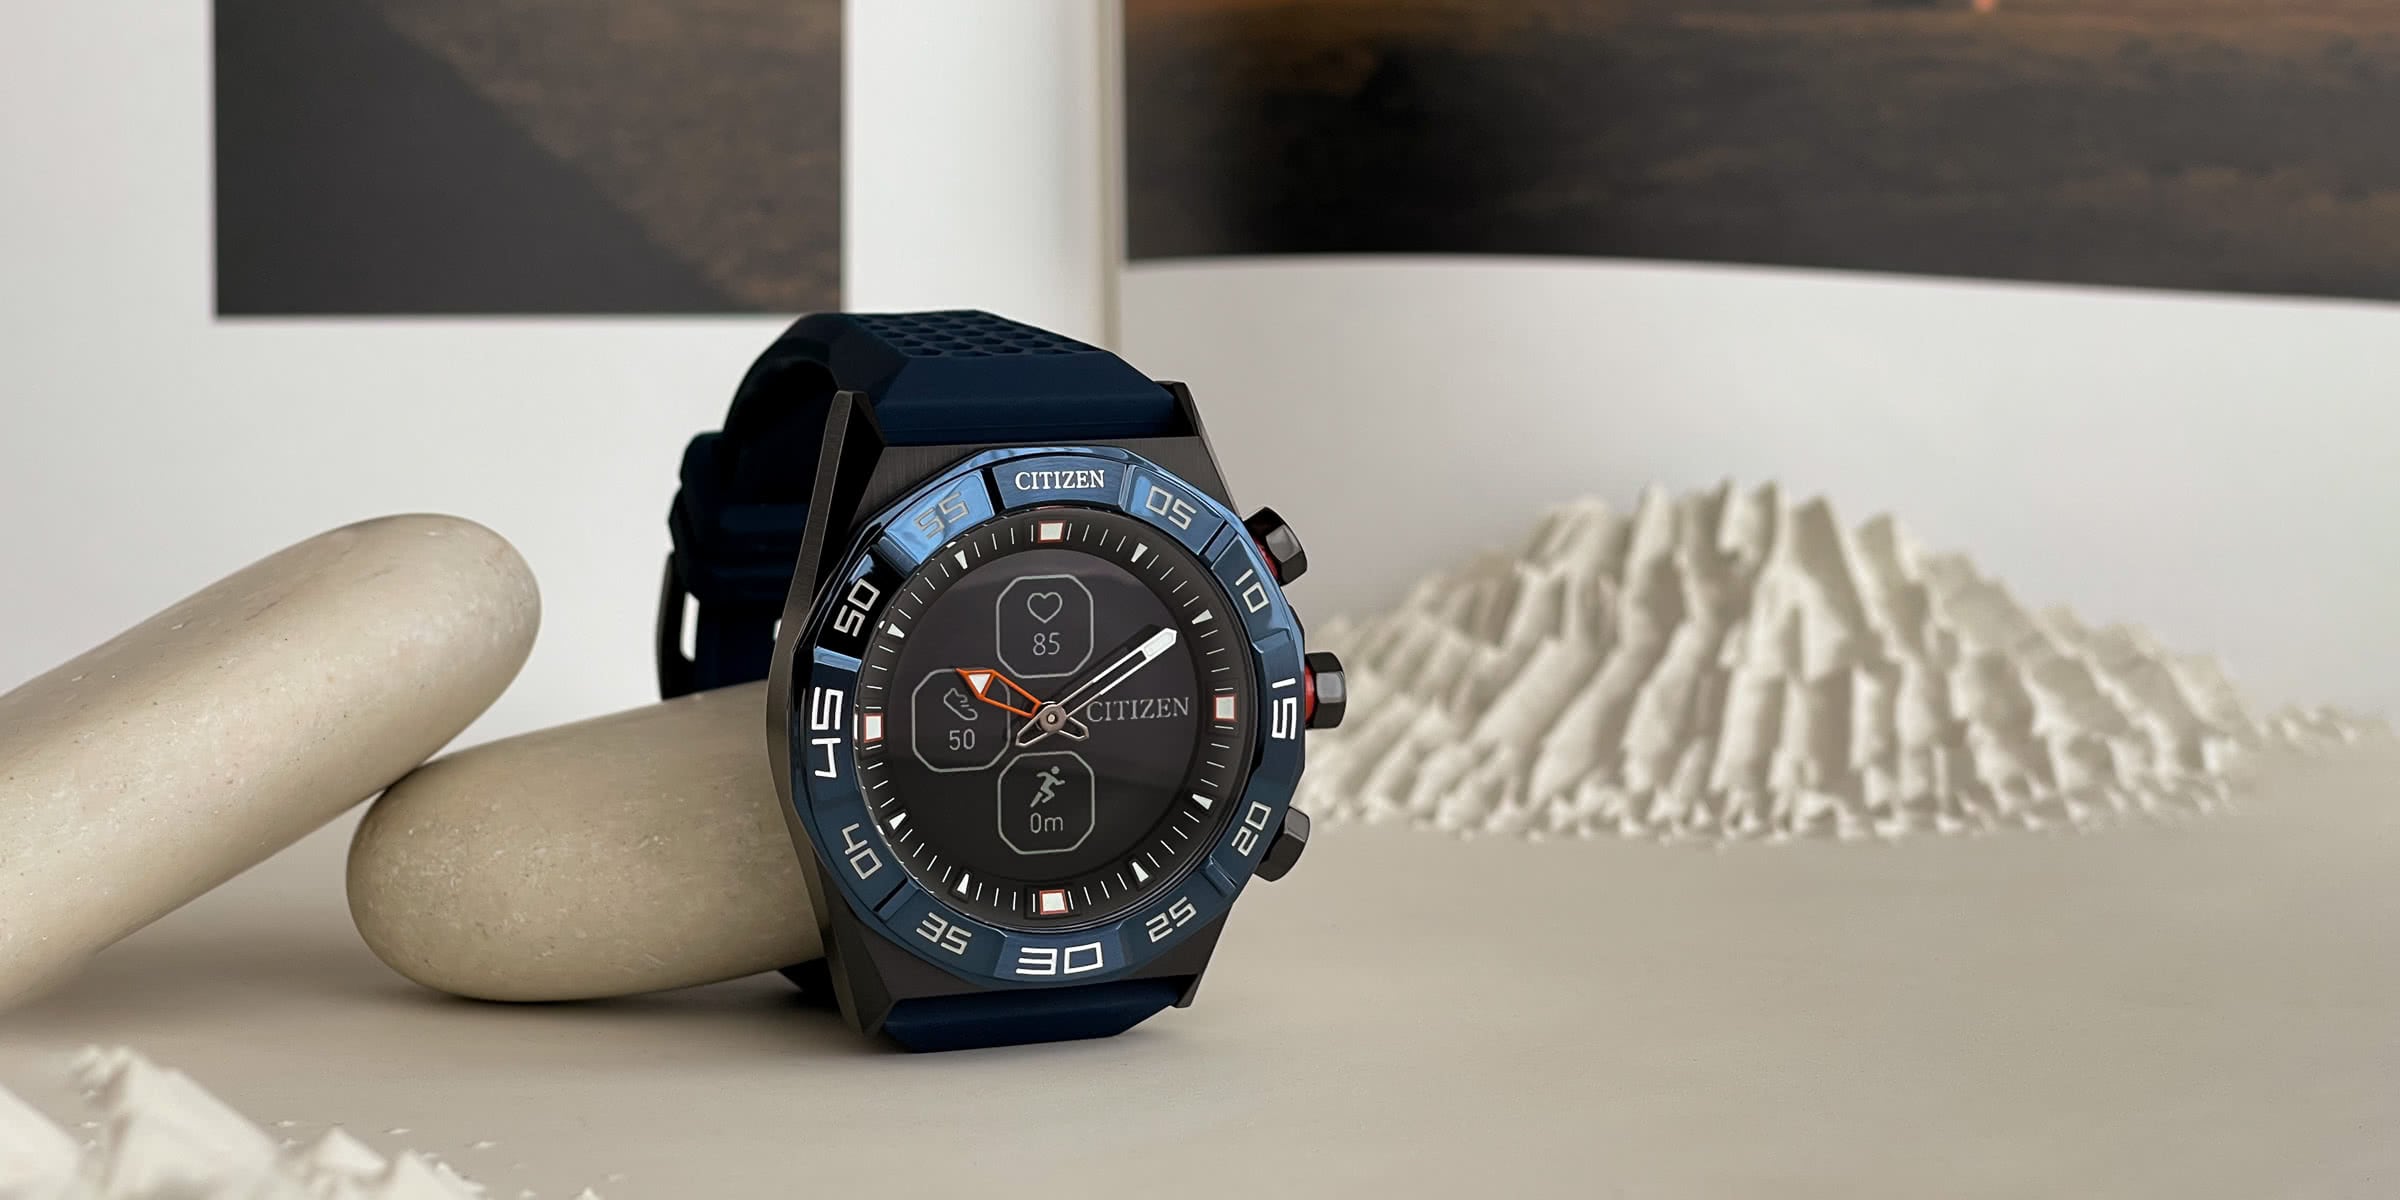 Citizen CZ Smart Hybrid Watch Review: Is It For You?